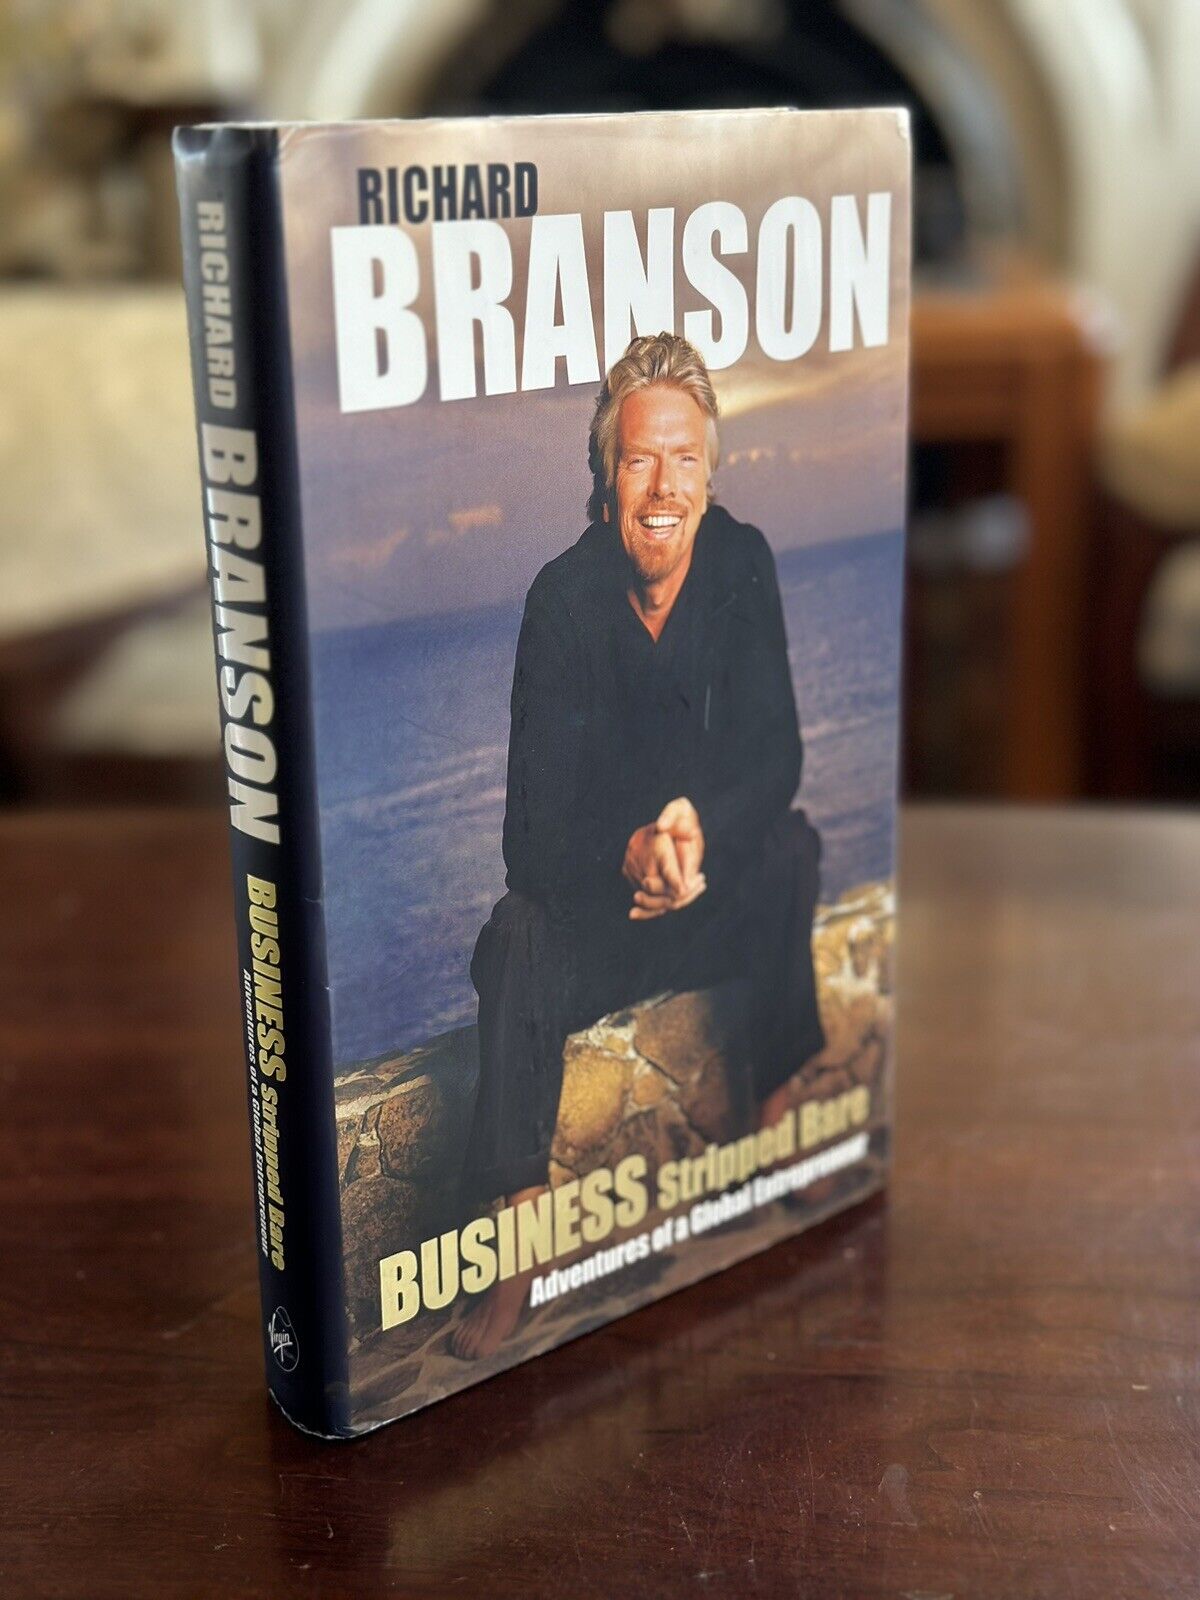 VIRGIN GALACTIC RICHARD BRANSON SIGNED BOOK BUSINESS STRIPPED BARE